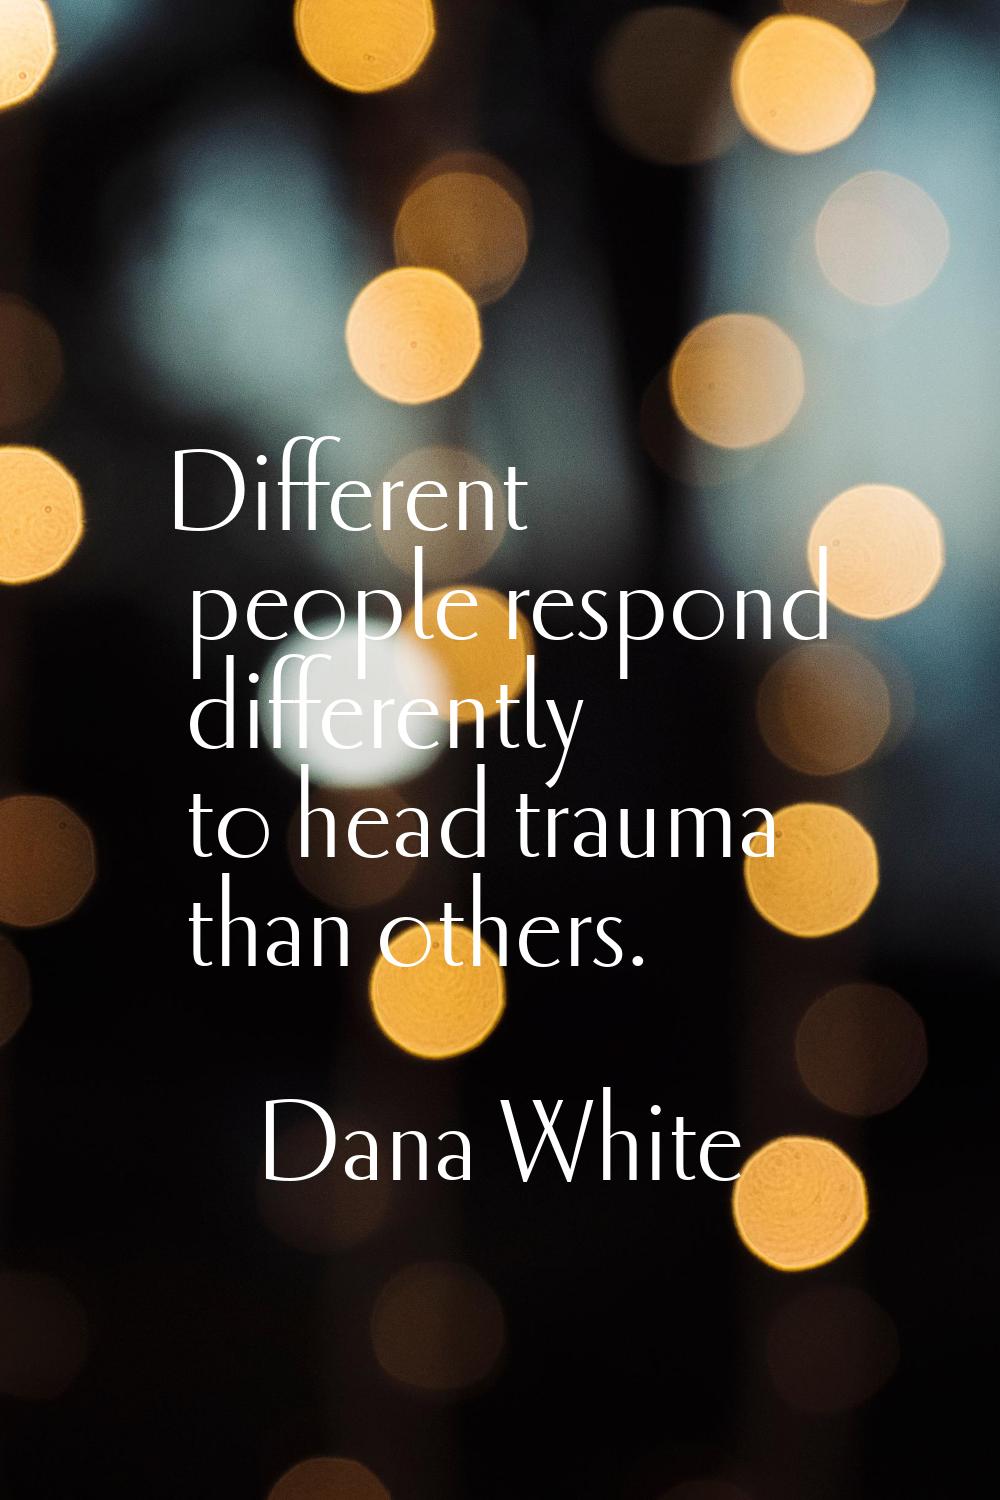 Different people respond differently to head trauma than others.